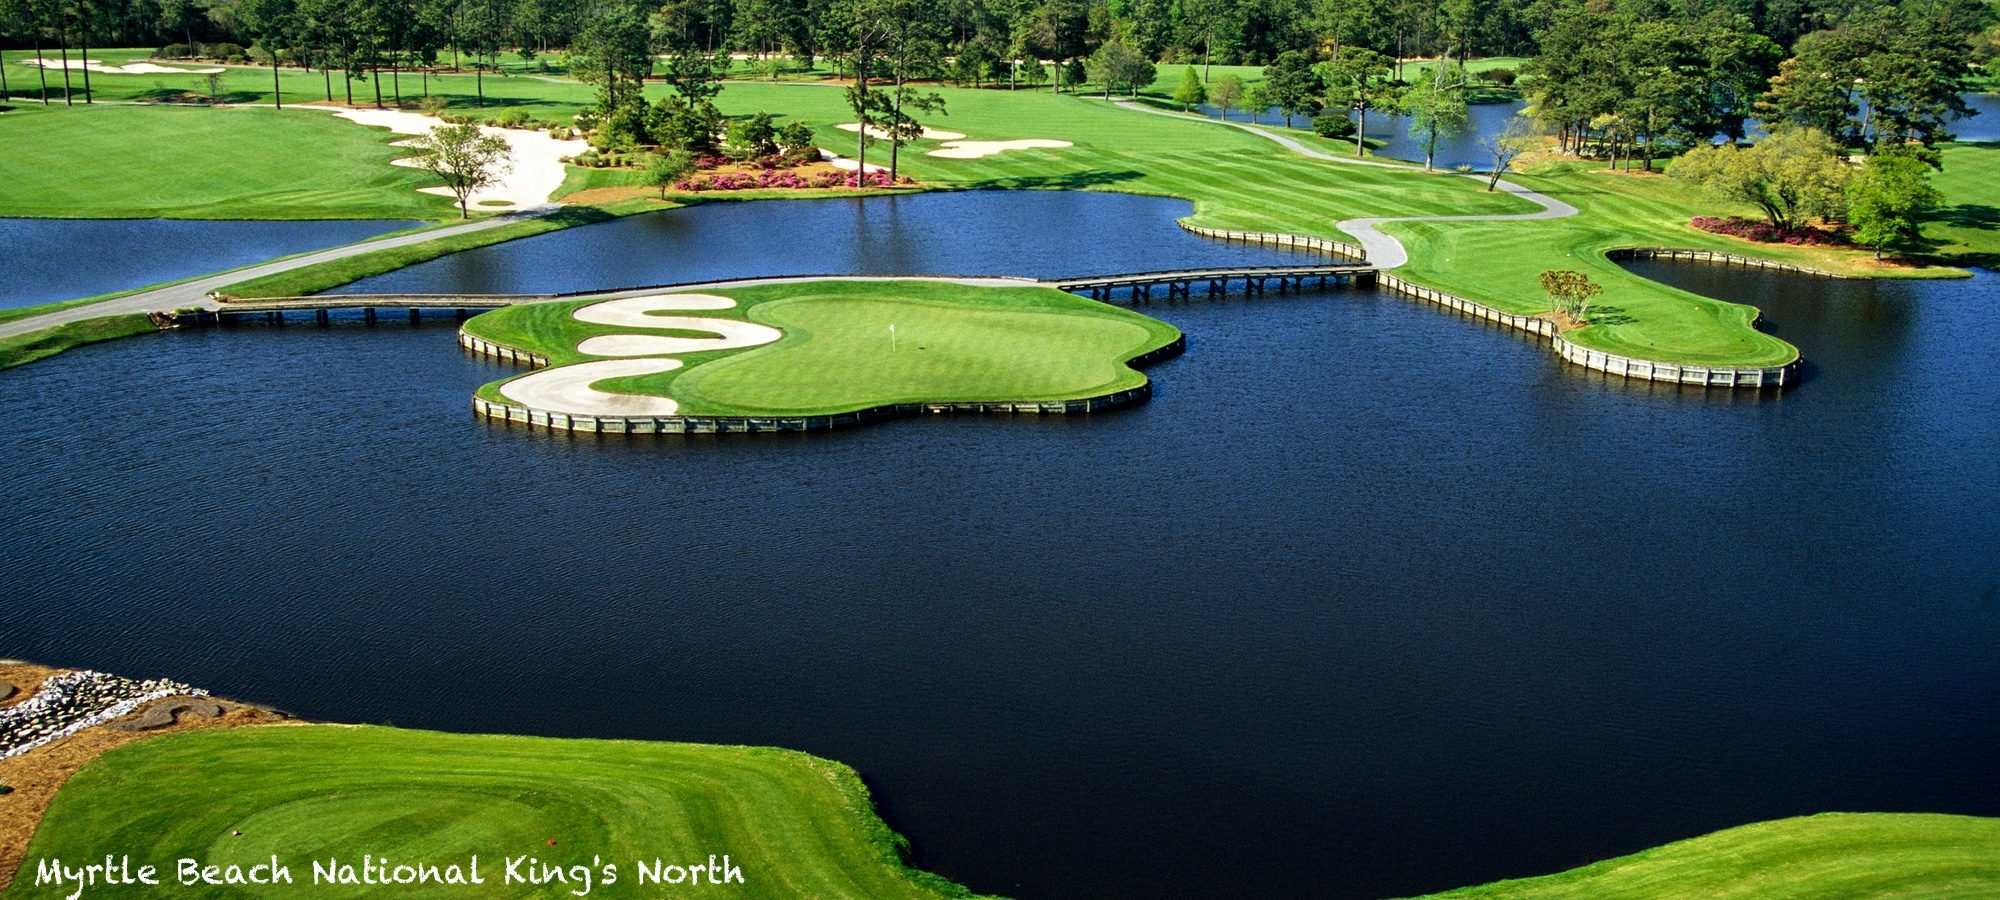 Myrtle Beach National King's North